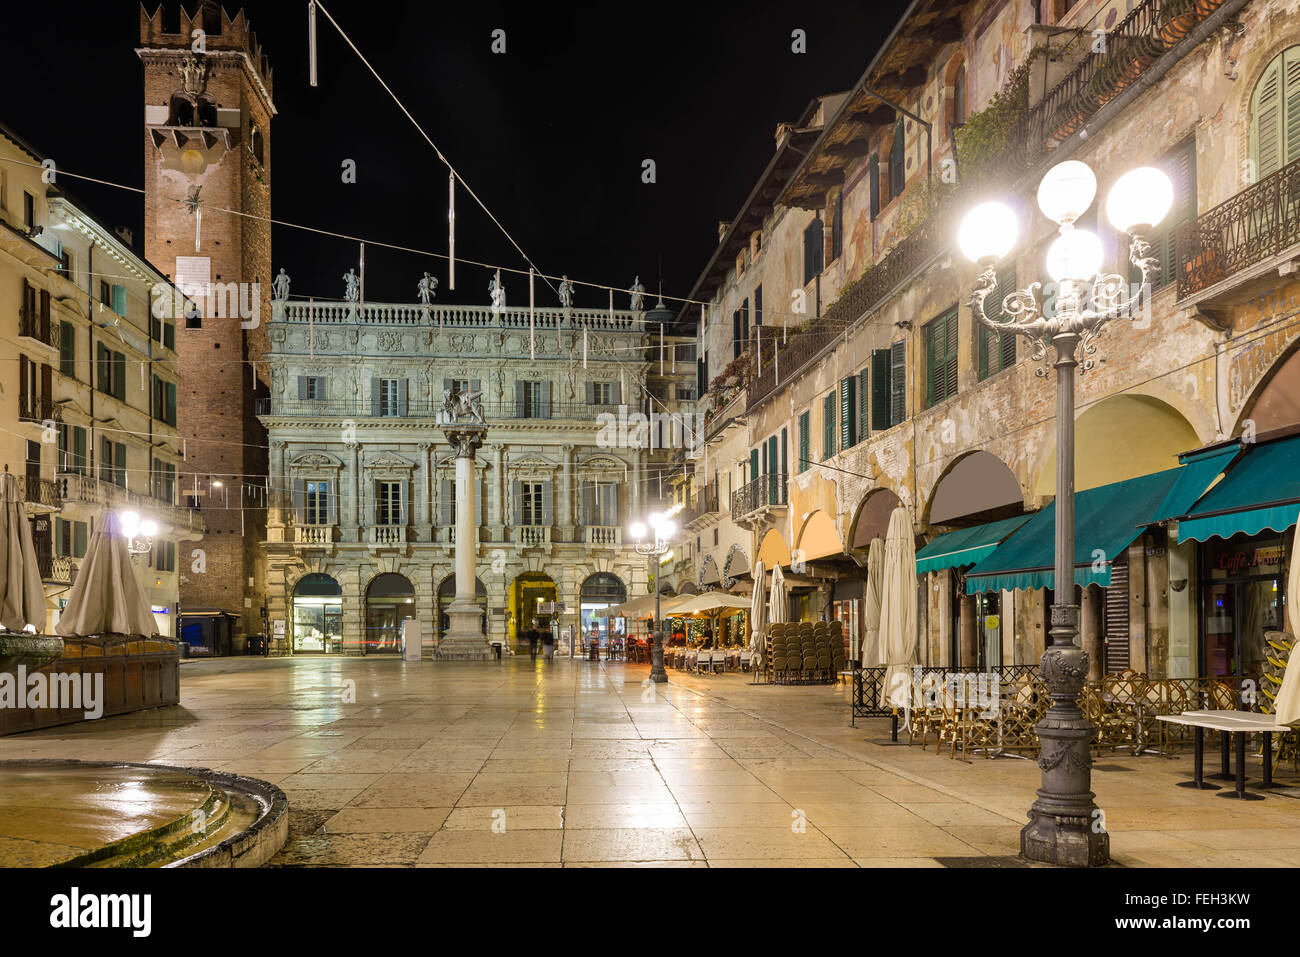 Nightview of Piazza delle Erbe, also called Market Square, where the forum was during the roman empire Stock Photo